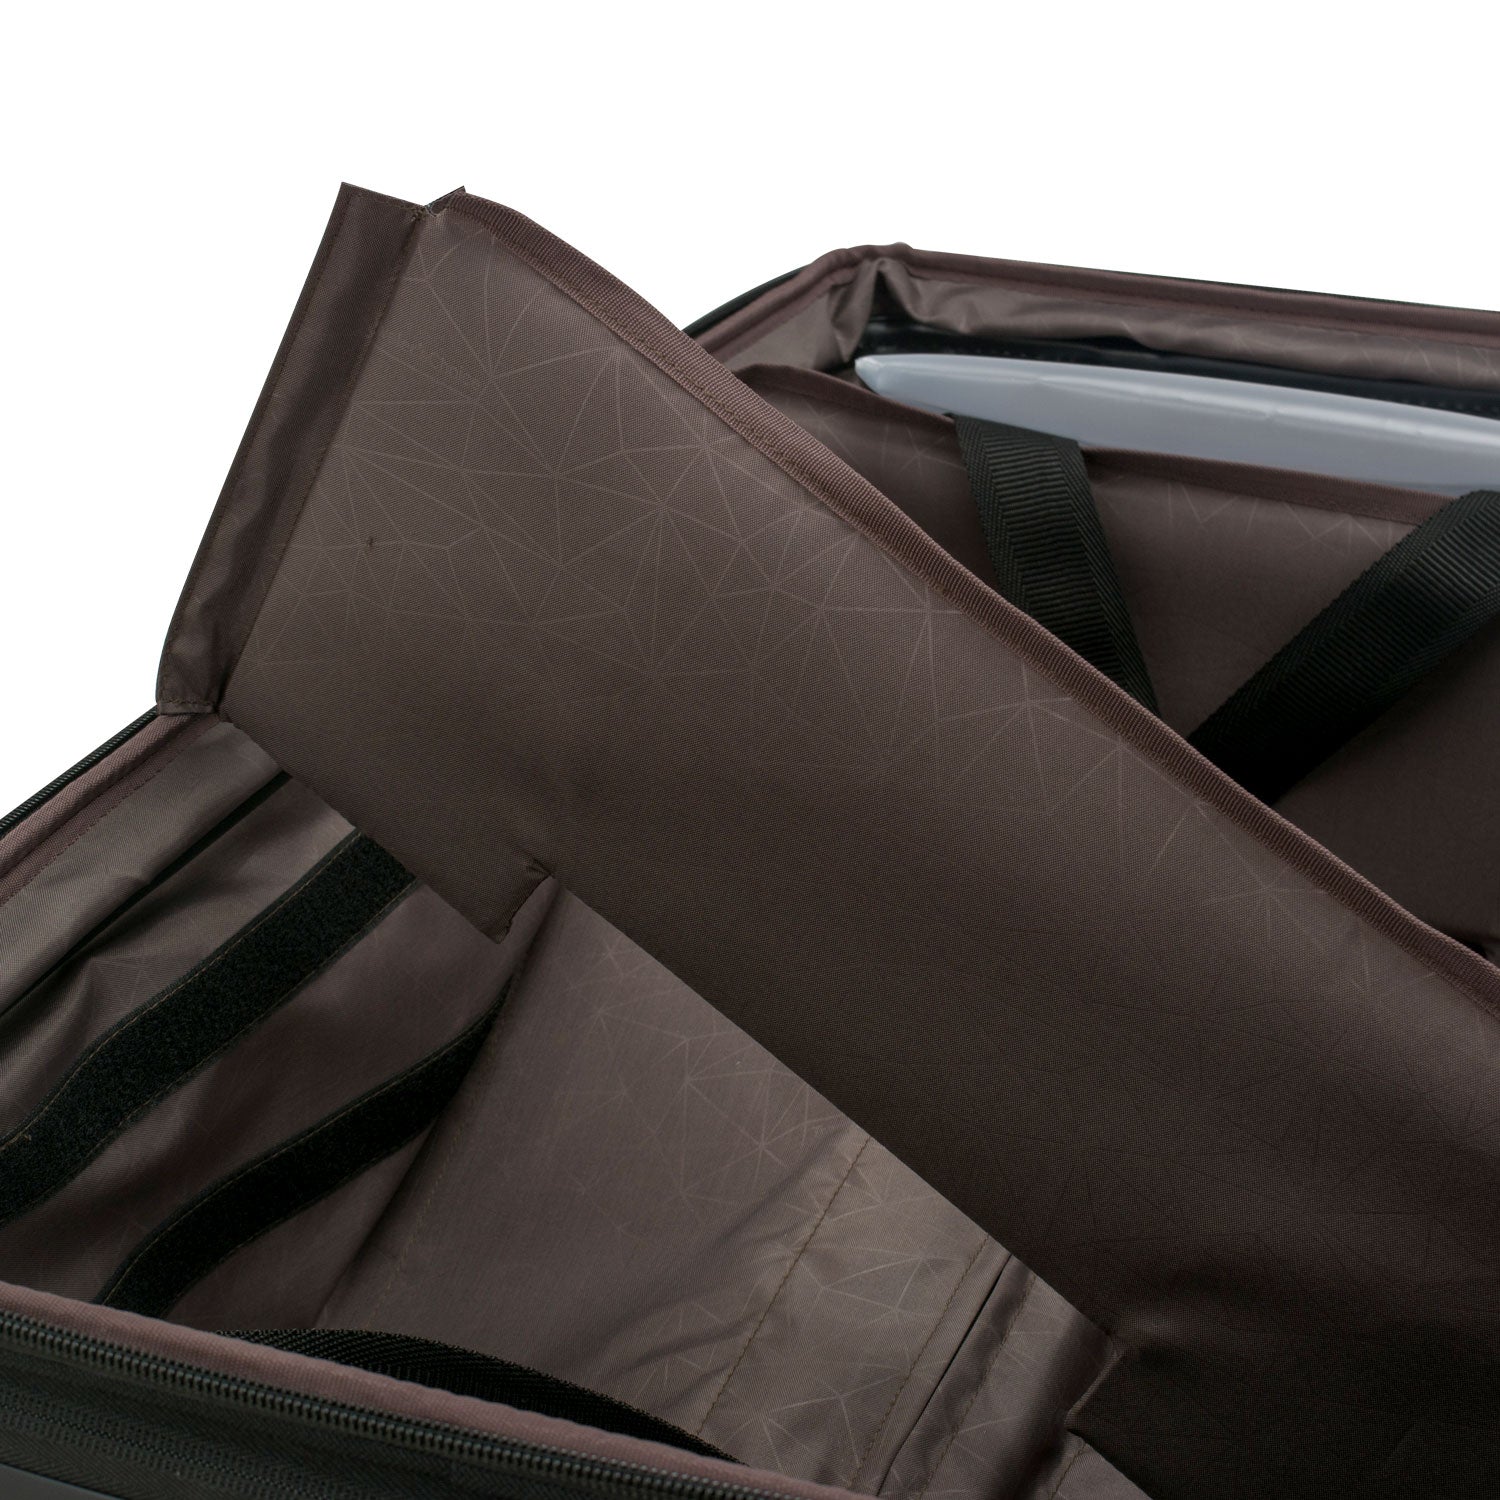 An image of the dividers that is included with each trunk luggage.